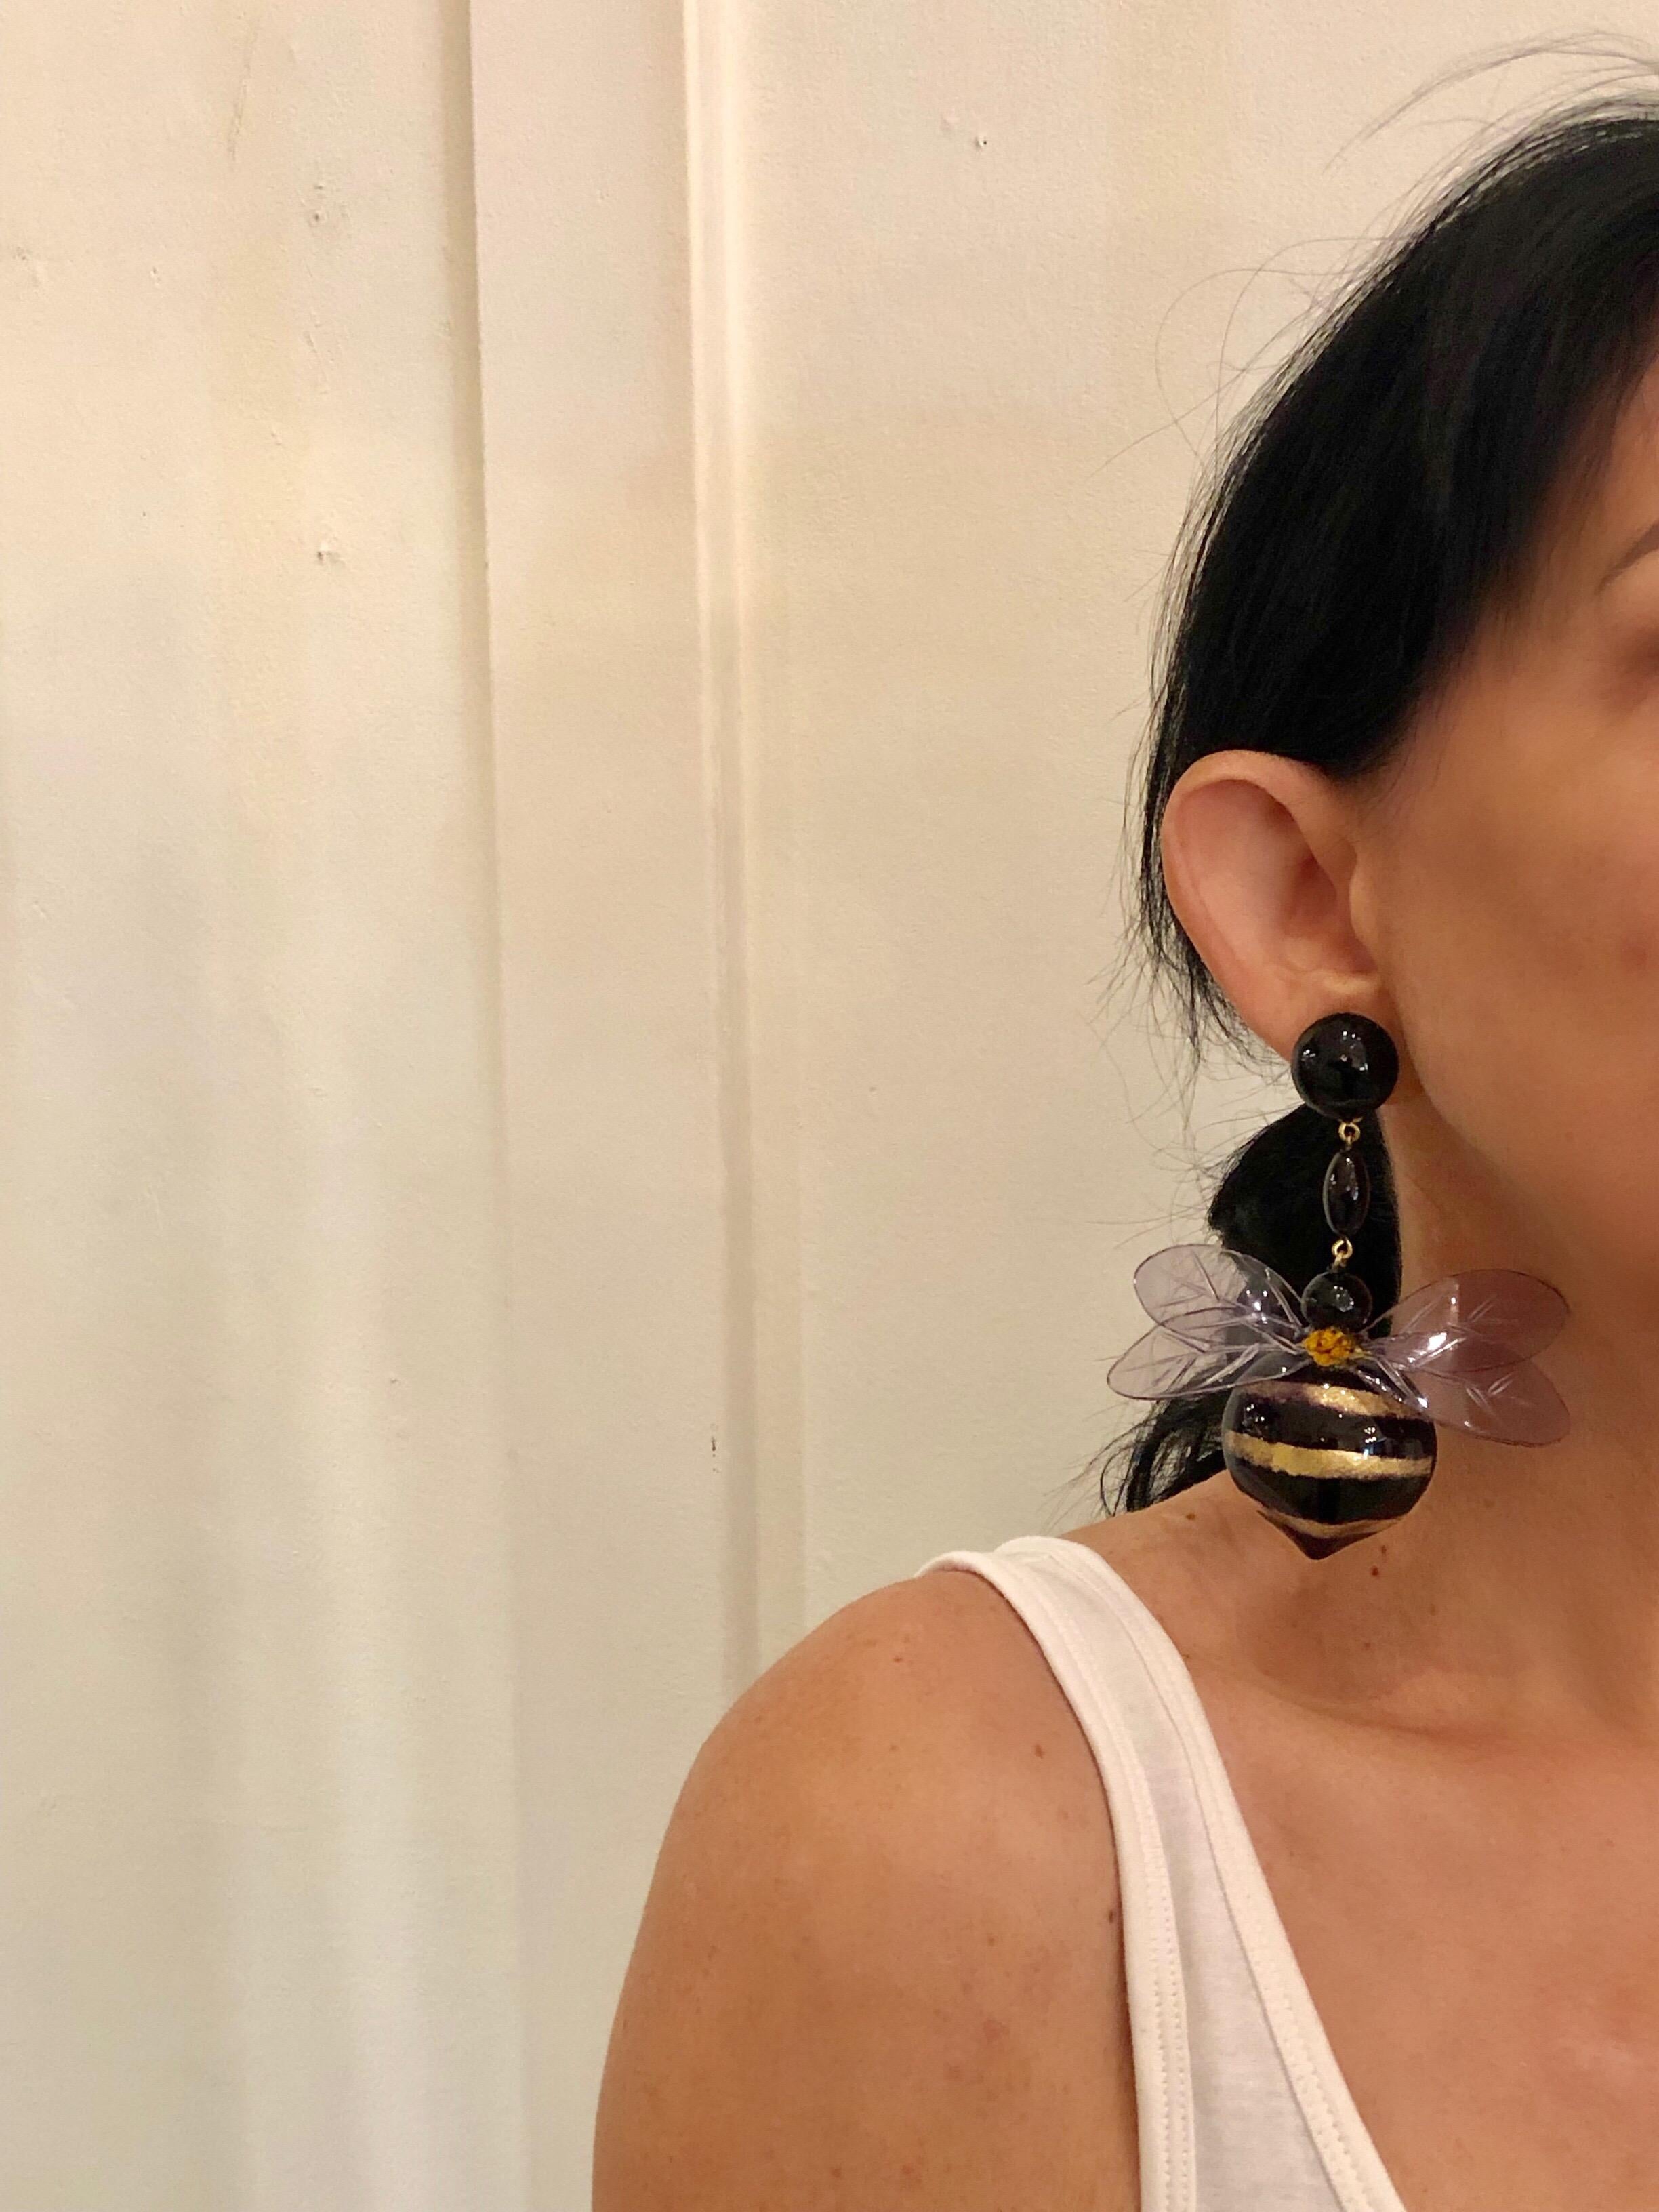 Unique handcrafted contemporary artisanal clip-on Statement earrings made in Paris France by Cilea Paris - lightweight, featuring two large black and gold bumblebees. The bumblebees are comprised out of resin and enamel and have carved clear lucite